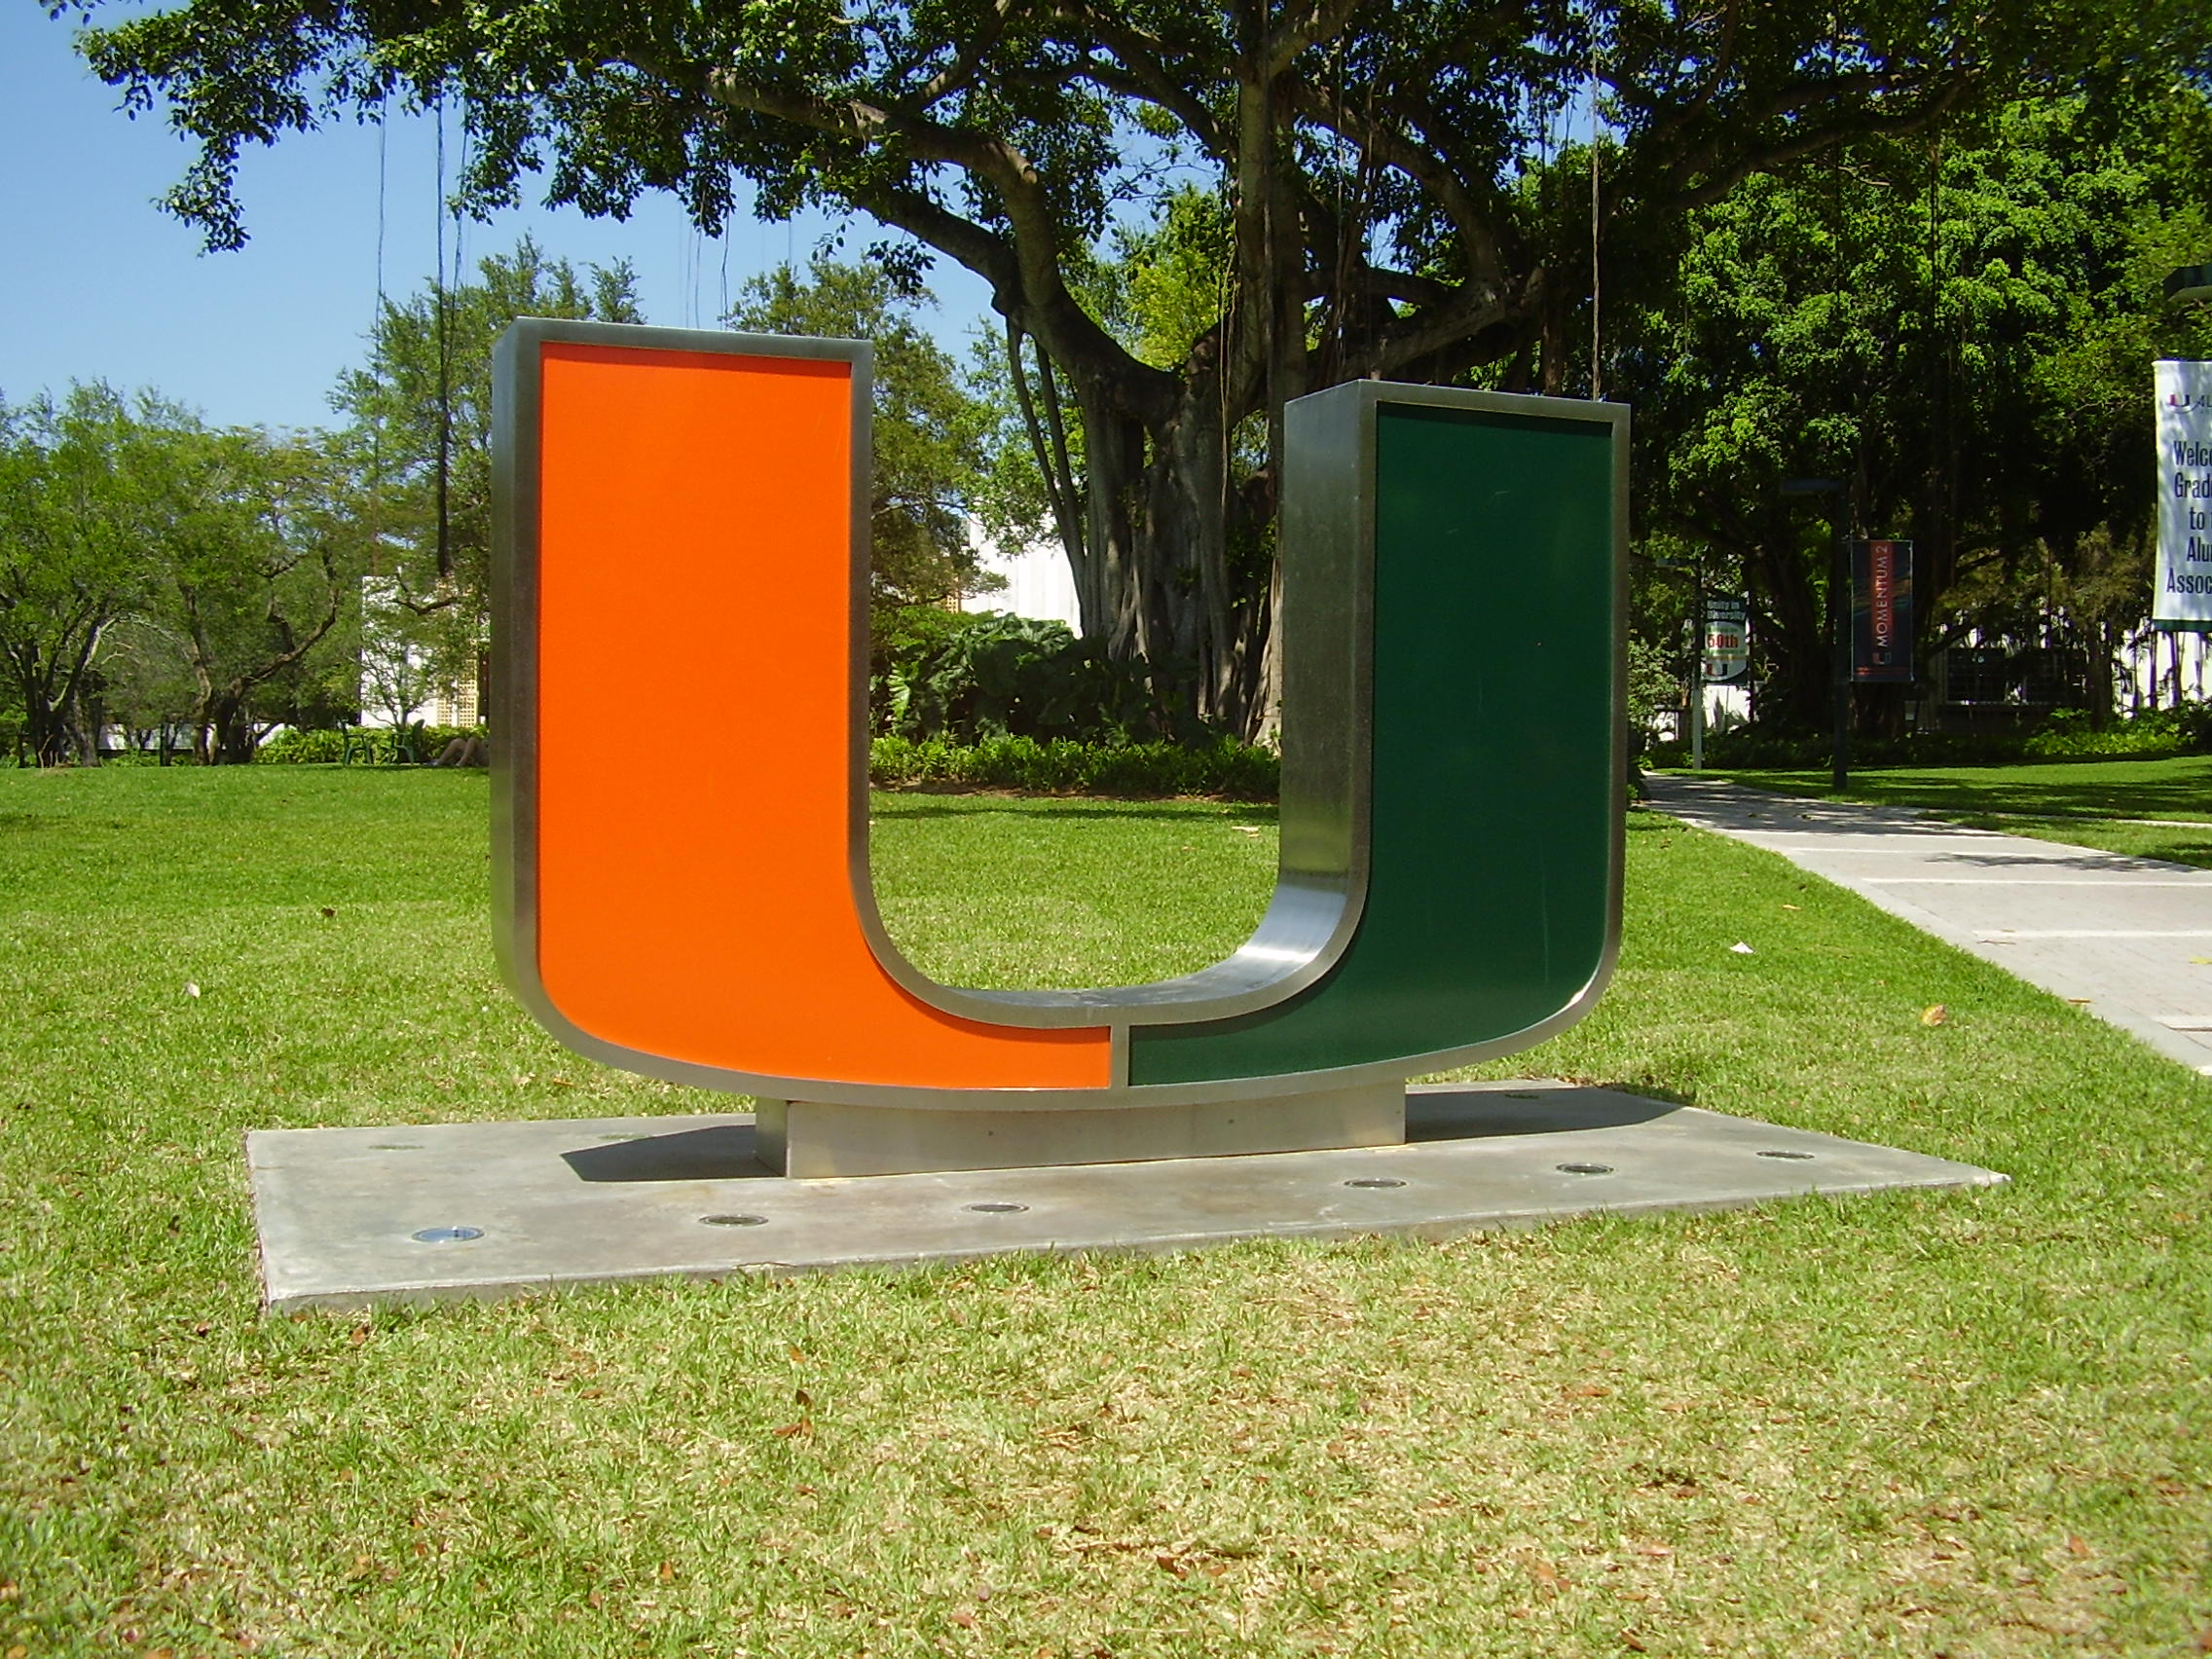 University of Miami asks students to observe classmates for 'microagressions'